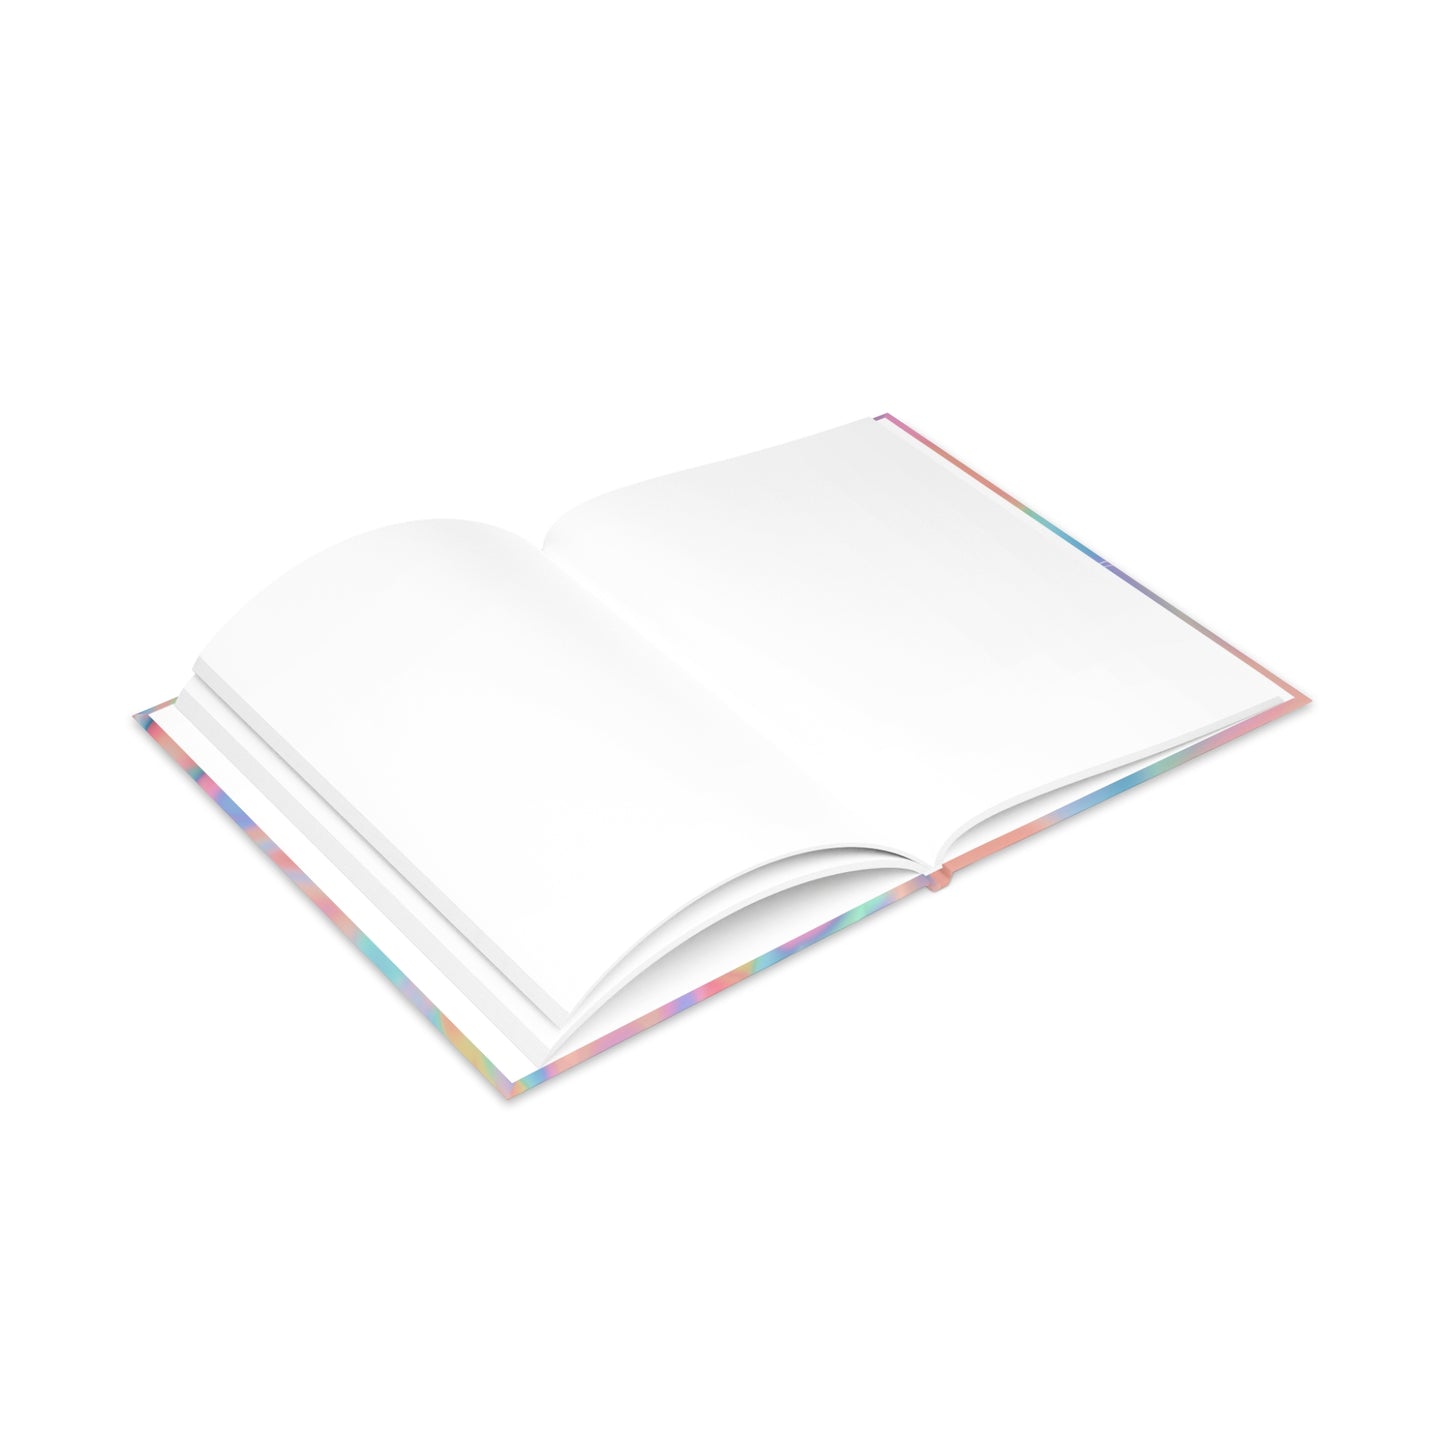 Hardcover Notebook with Puffy Covers